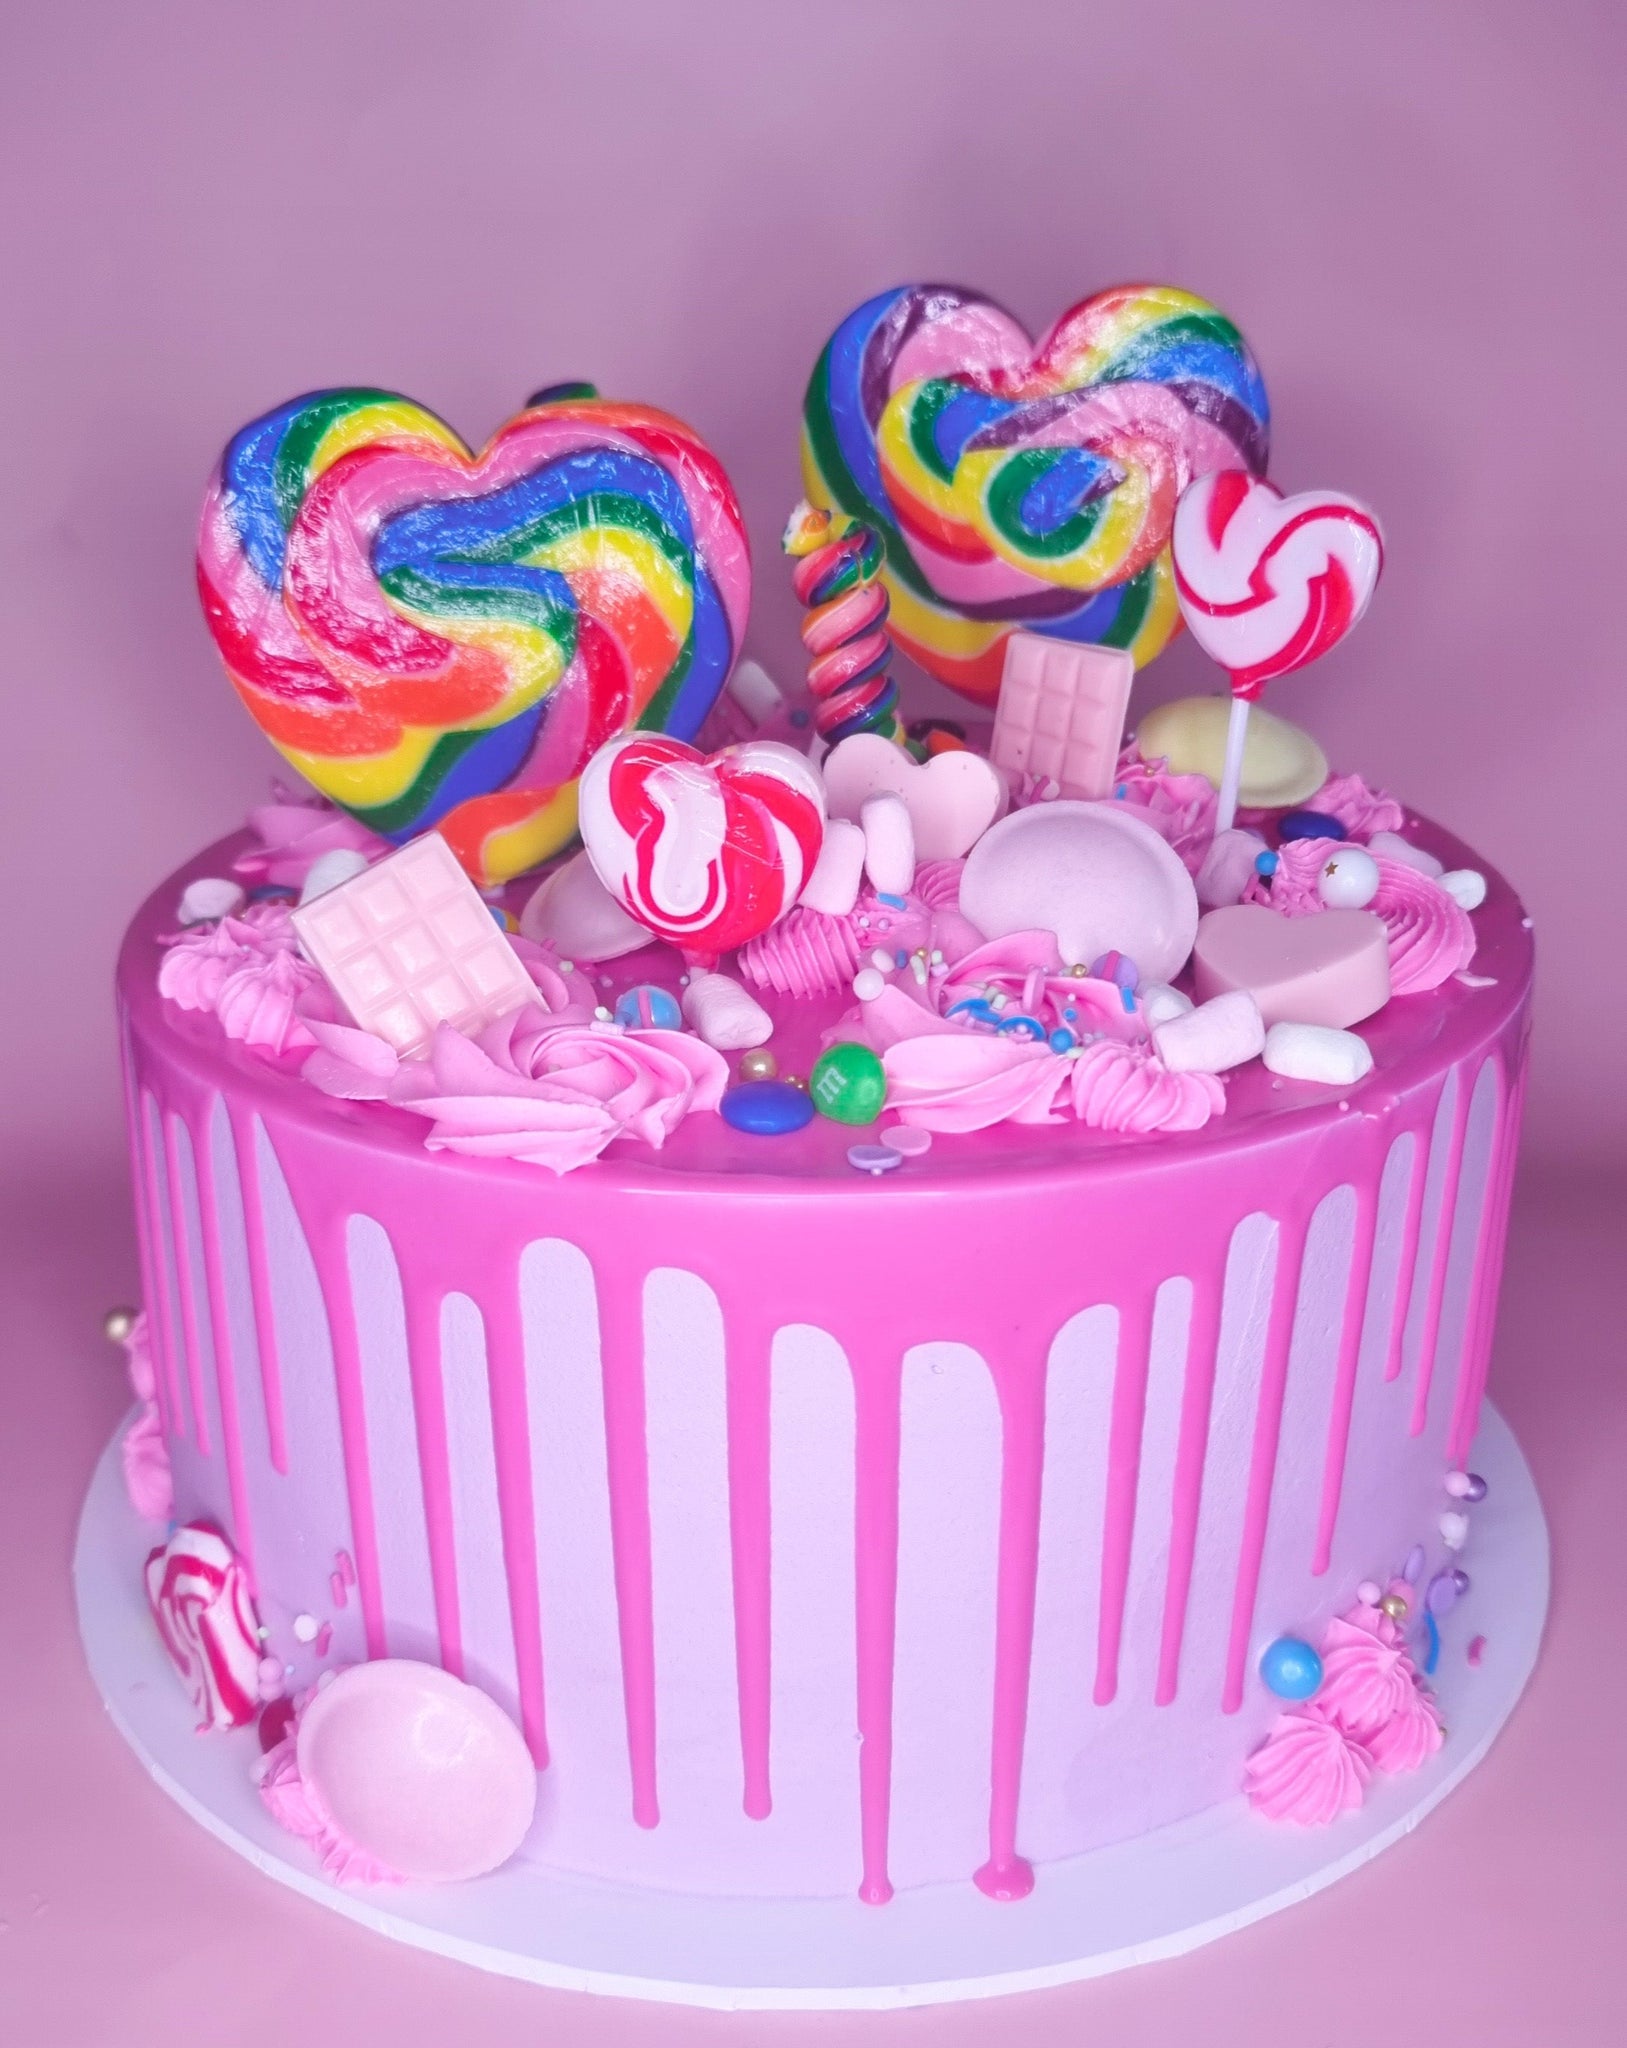 Candyland Birthday Cake – Cookie Momster House